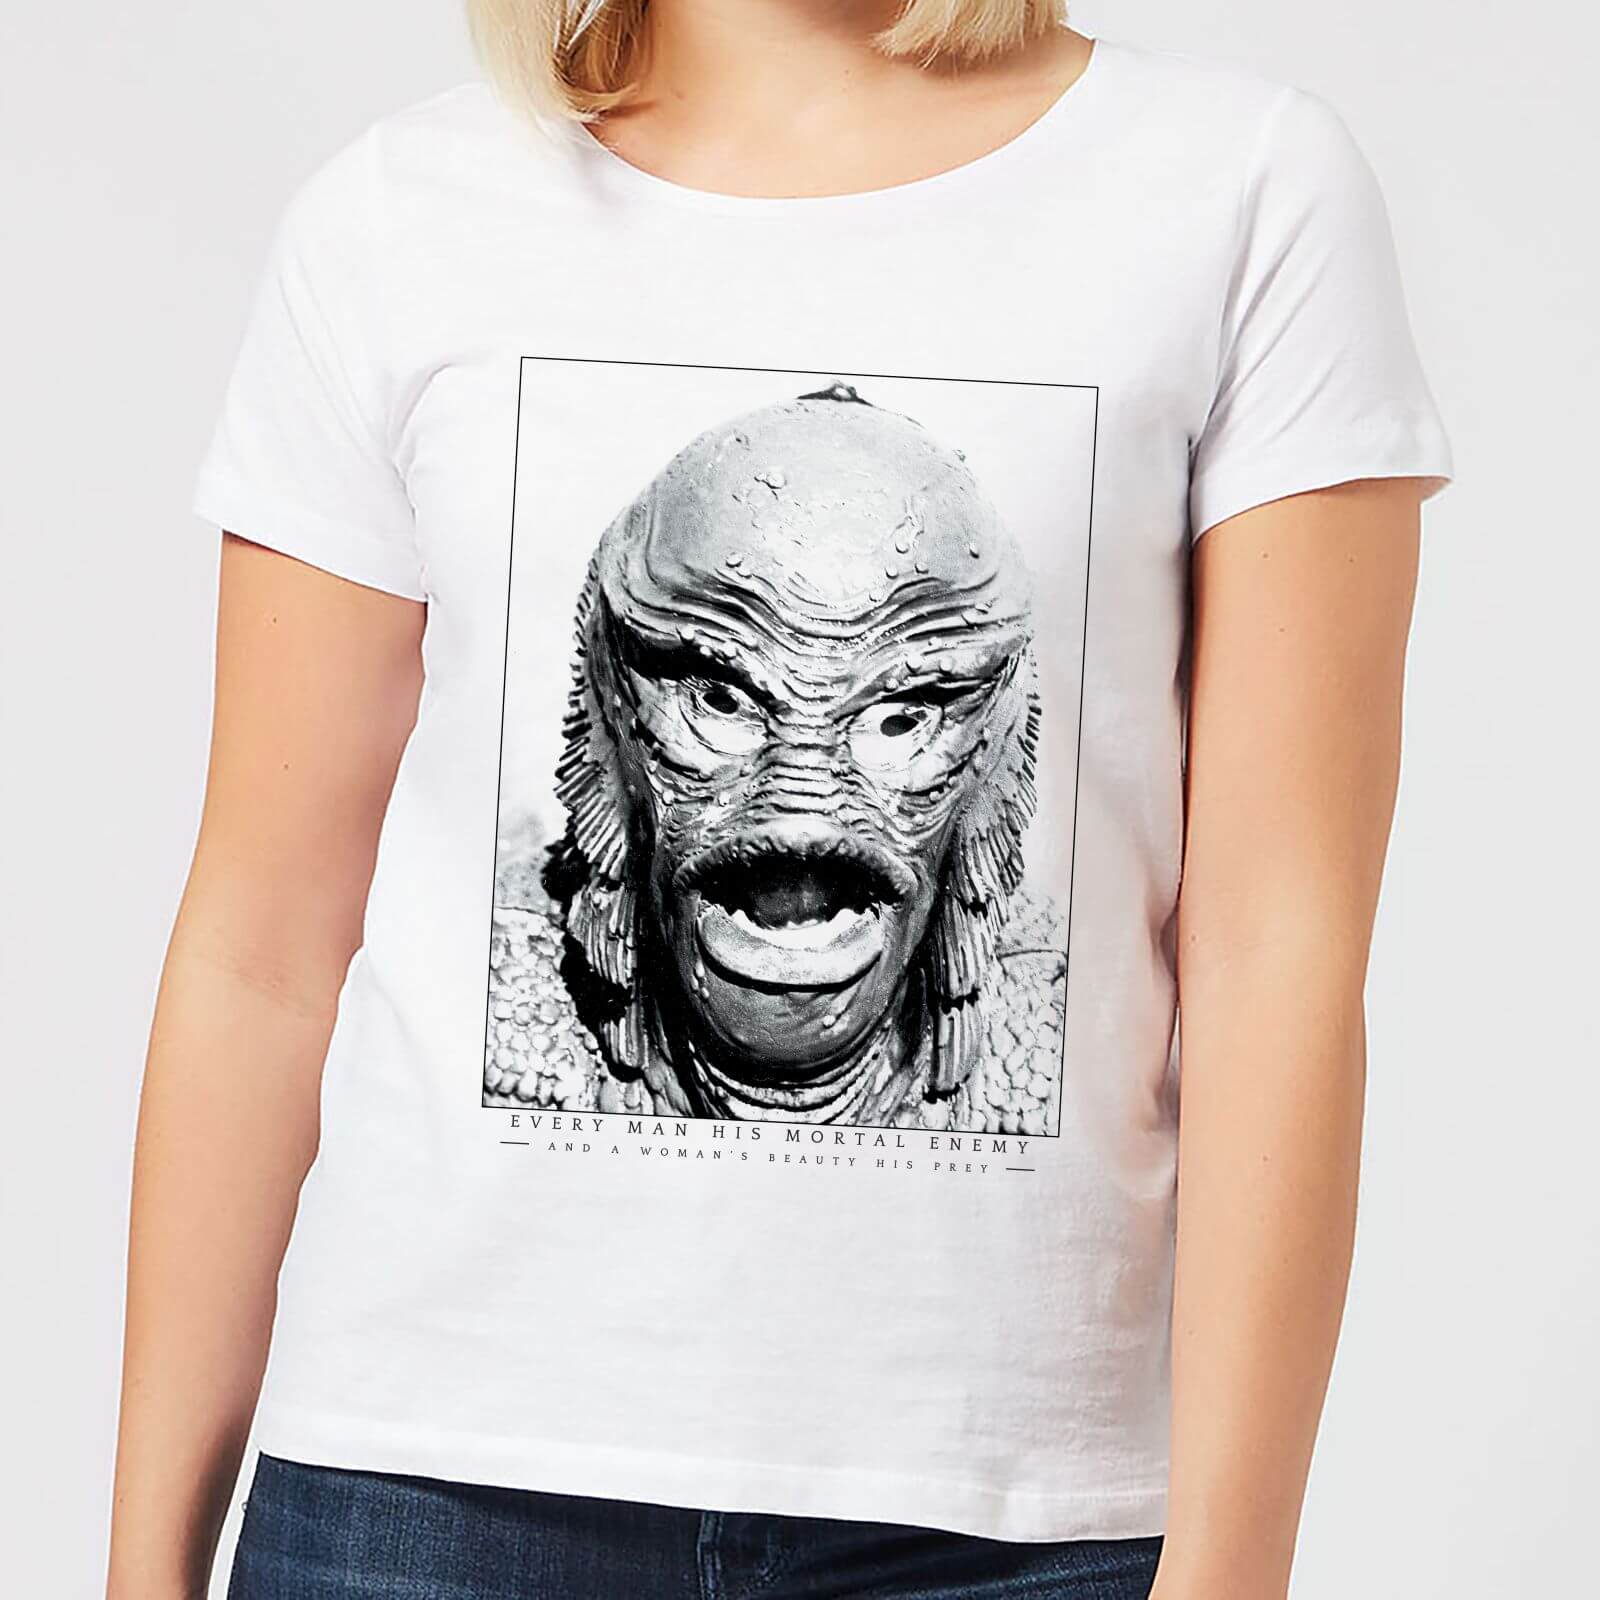 Universal Monsters Creature From The Black Lagoon Portrait Women's T-Shirt - White - 4XL - White